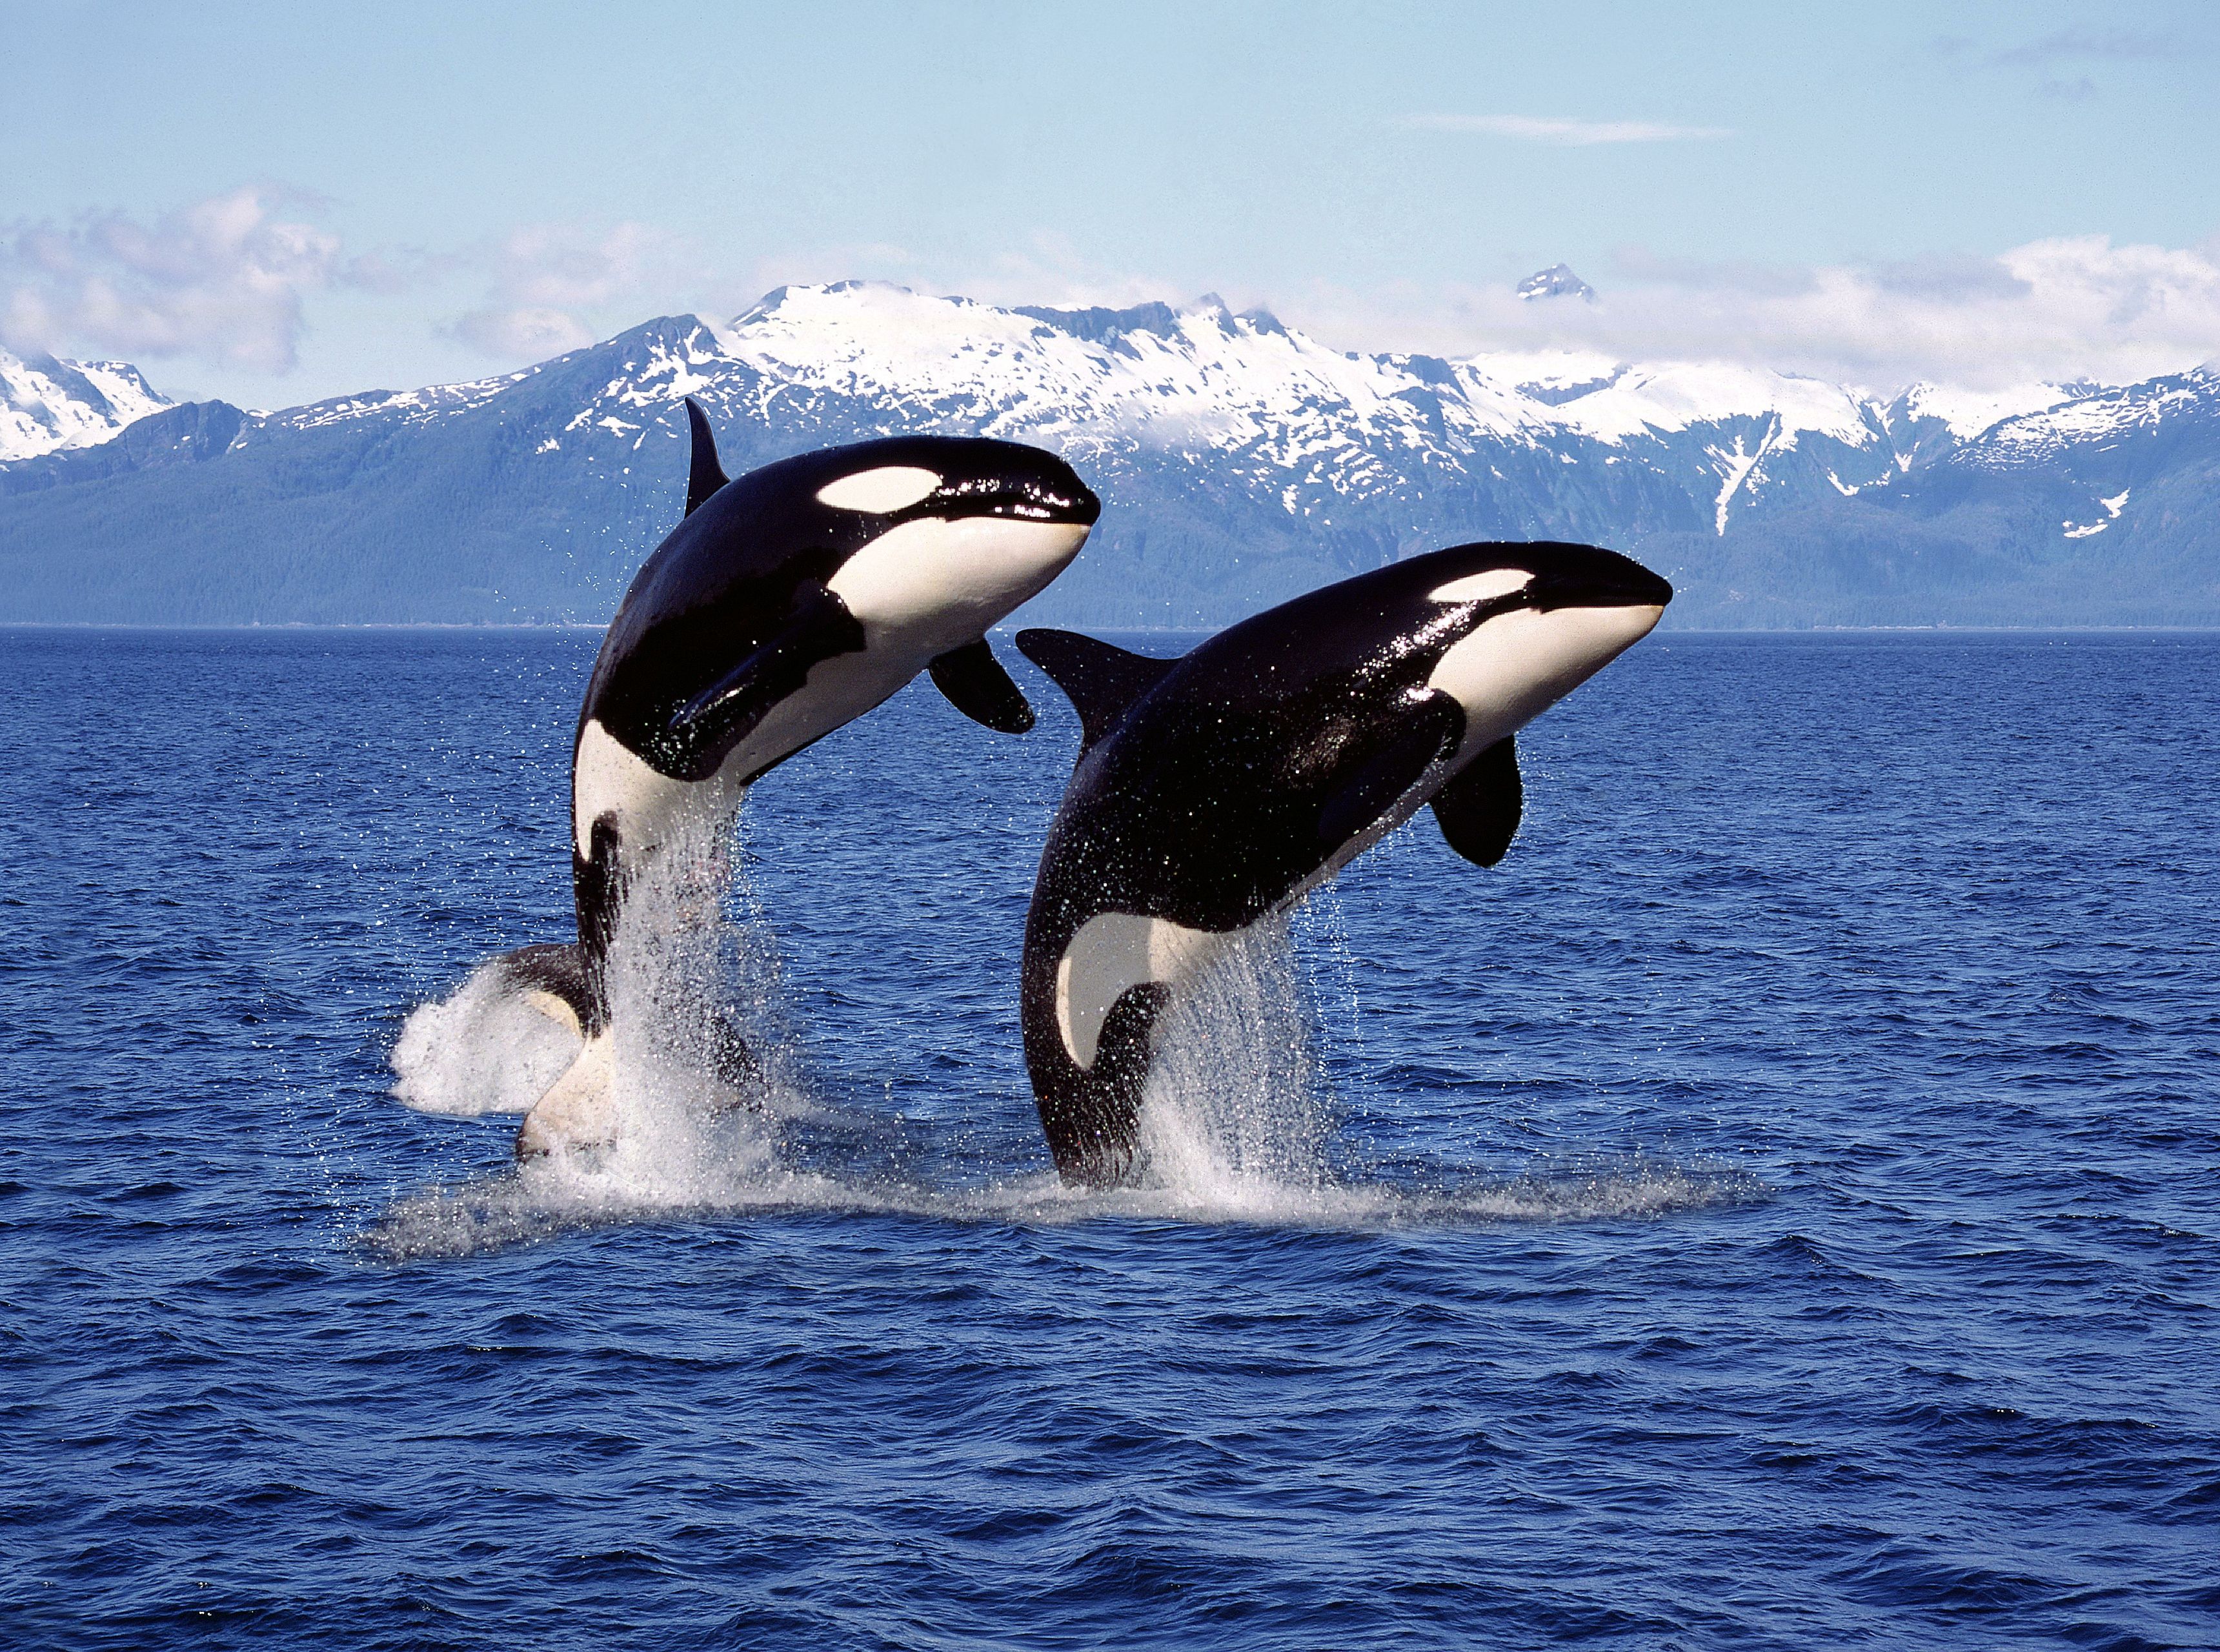 Two orcas jumping in the ocean n Iceland, with montains in the background